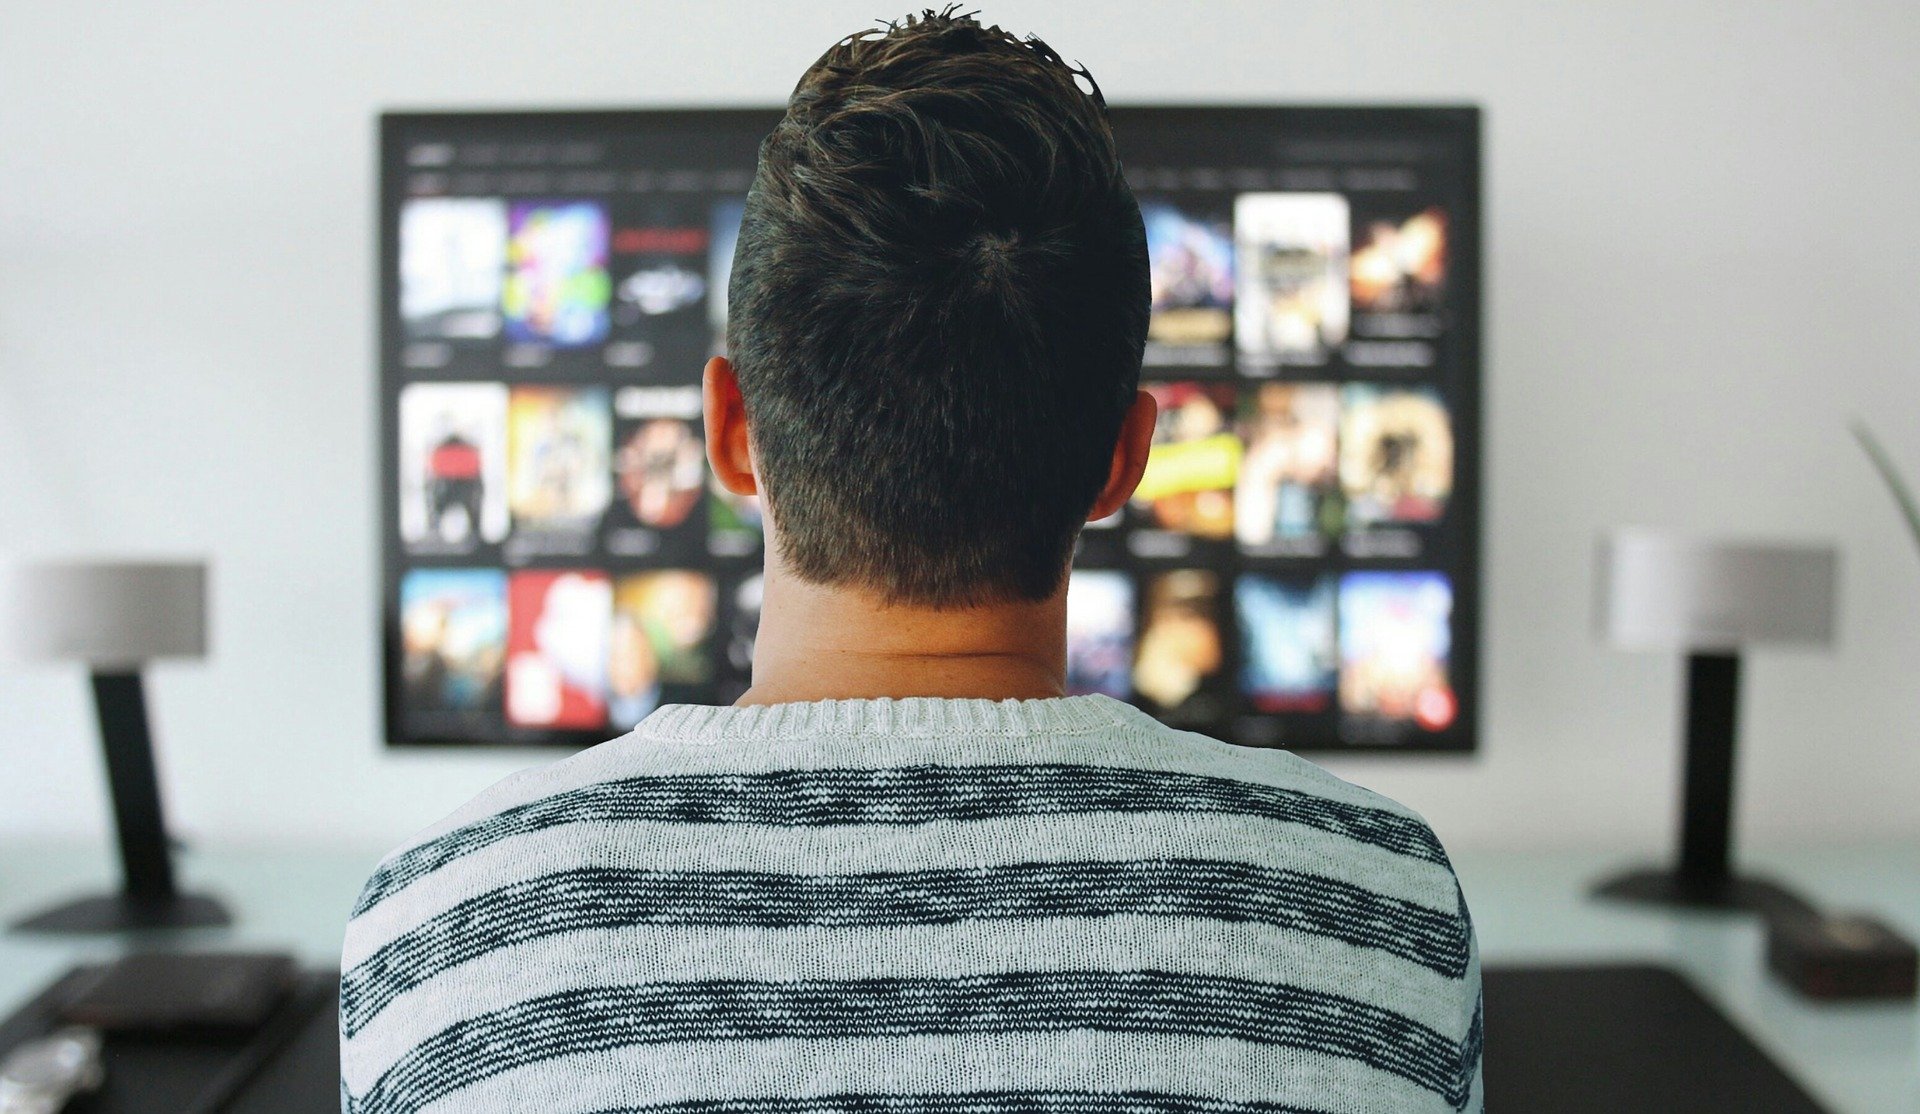 NEWS | Cost of TV Licence to increase from 1st April